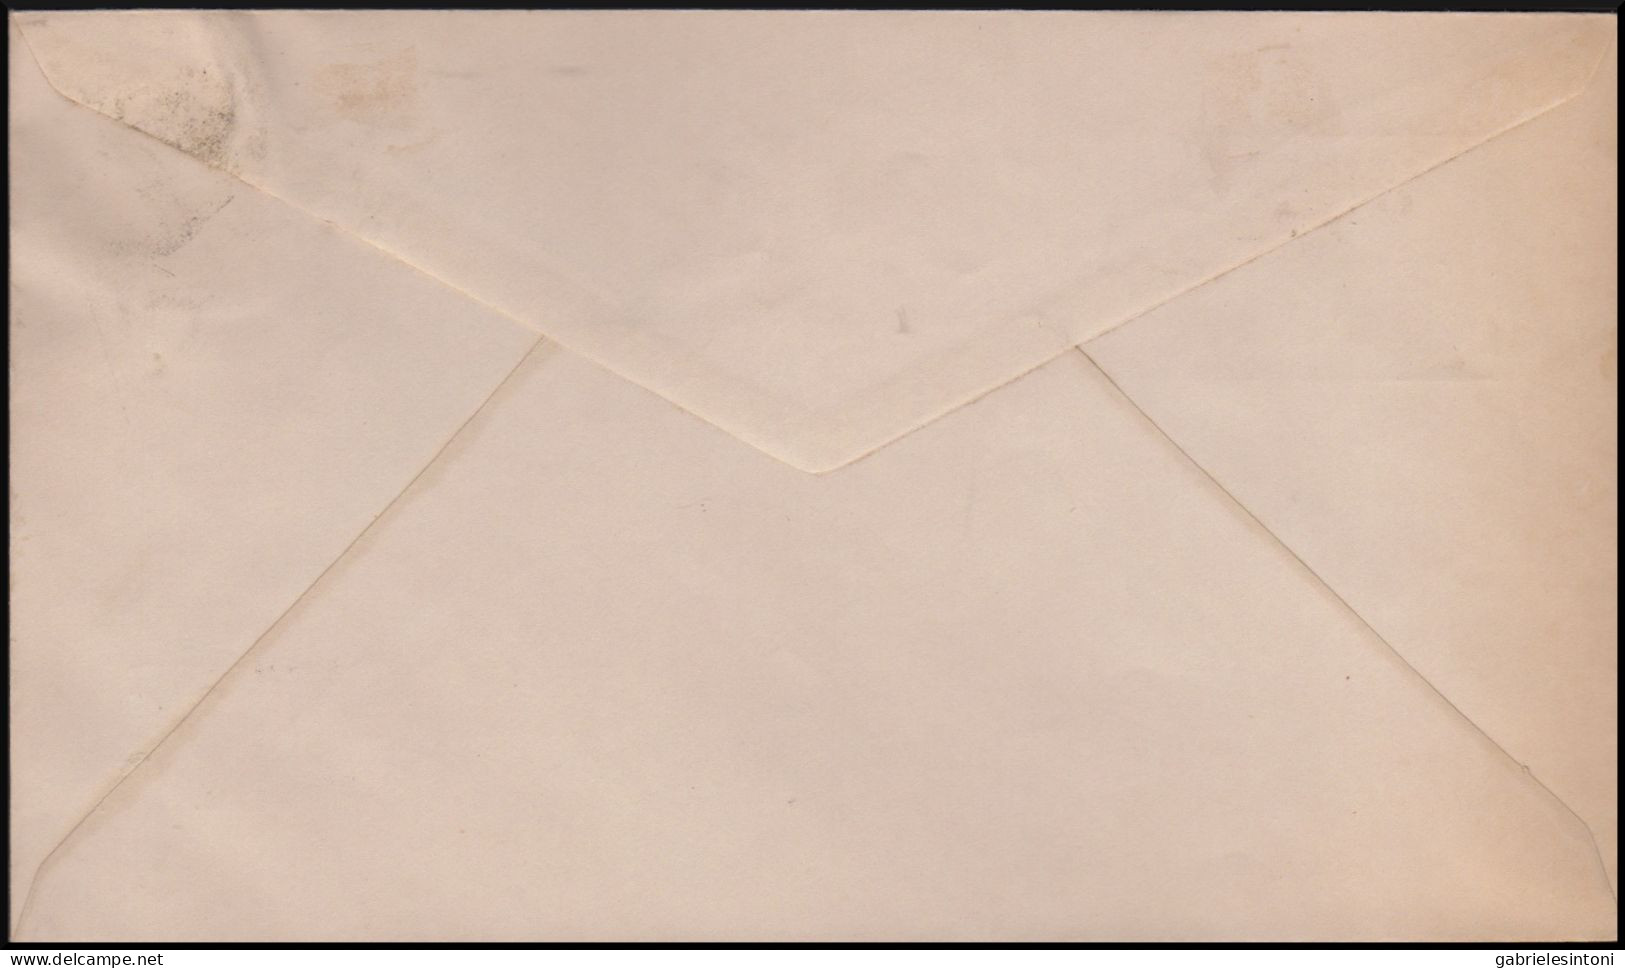 PM 11 - 1945 - Military Post. Three Air Mail Letter Sent From Burma To Rangoon. Japanese Occupation. - Occupazione Giapponese